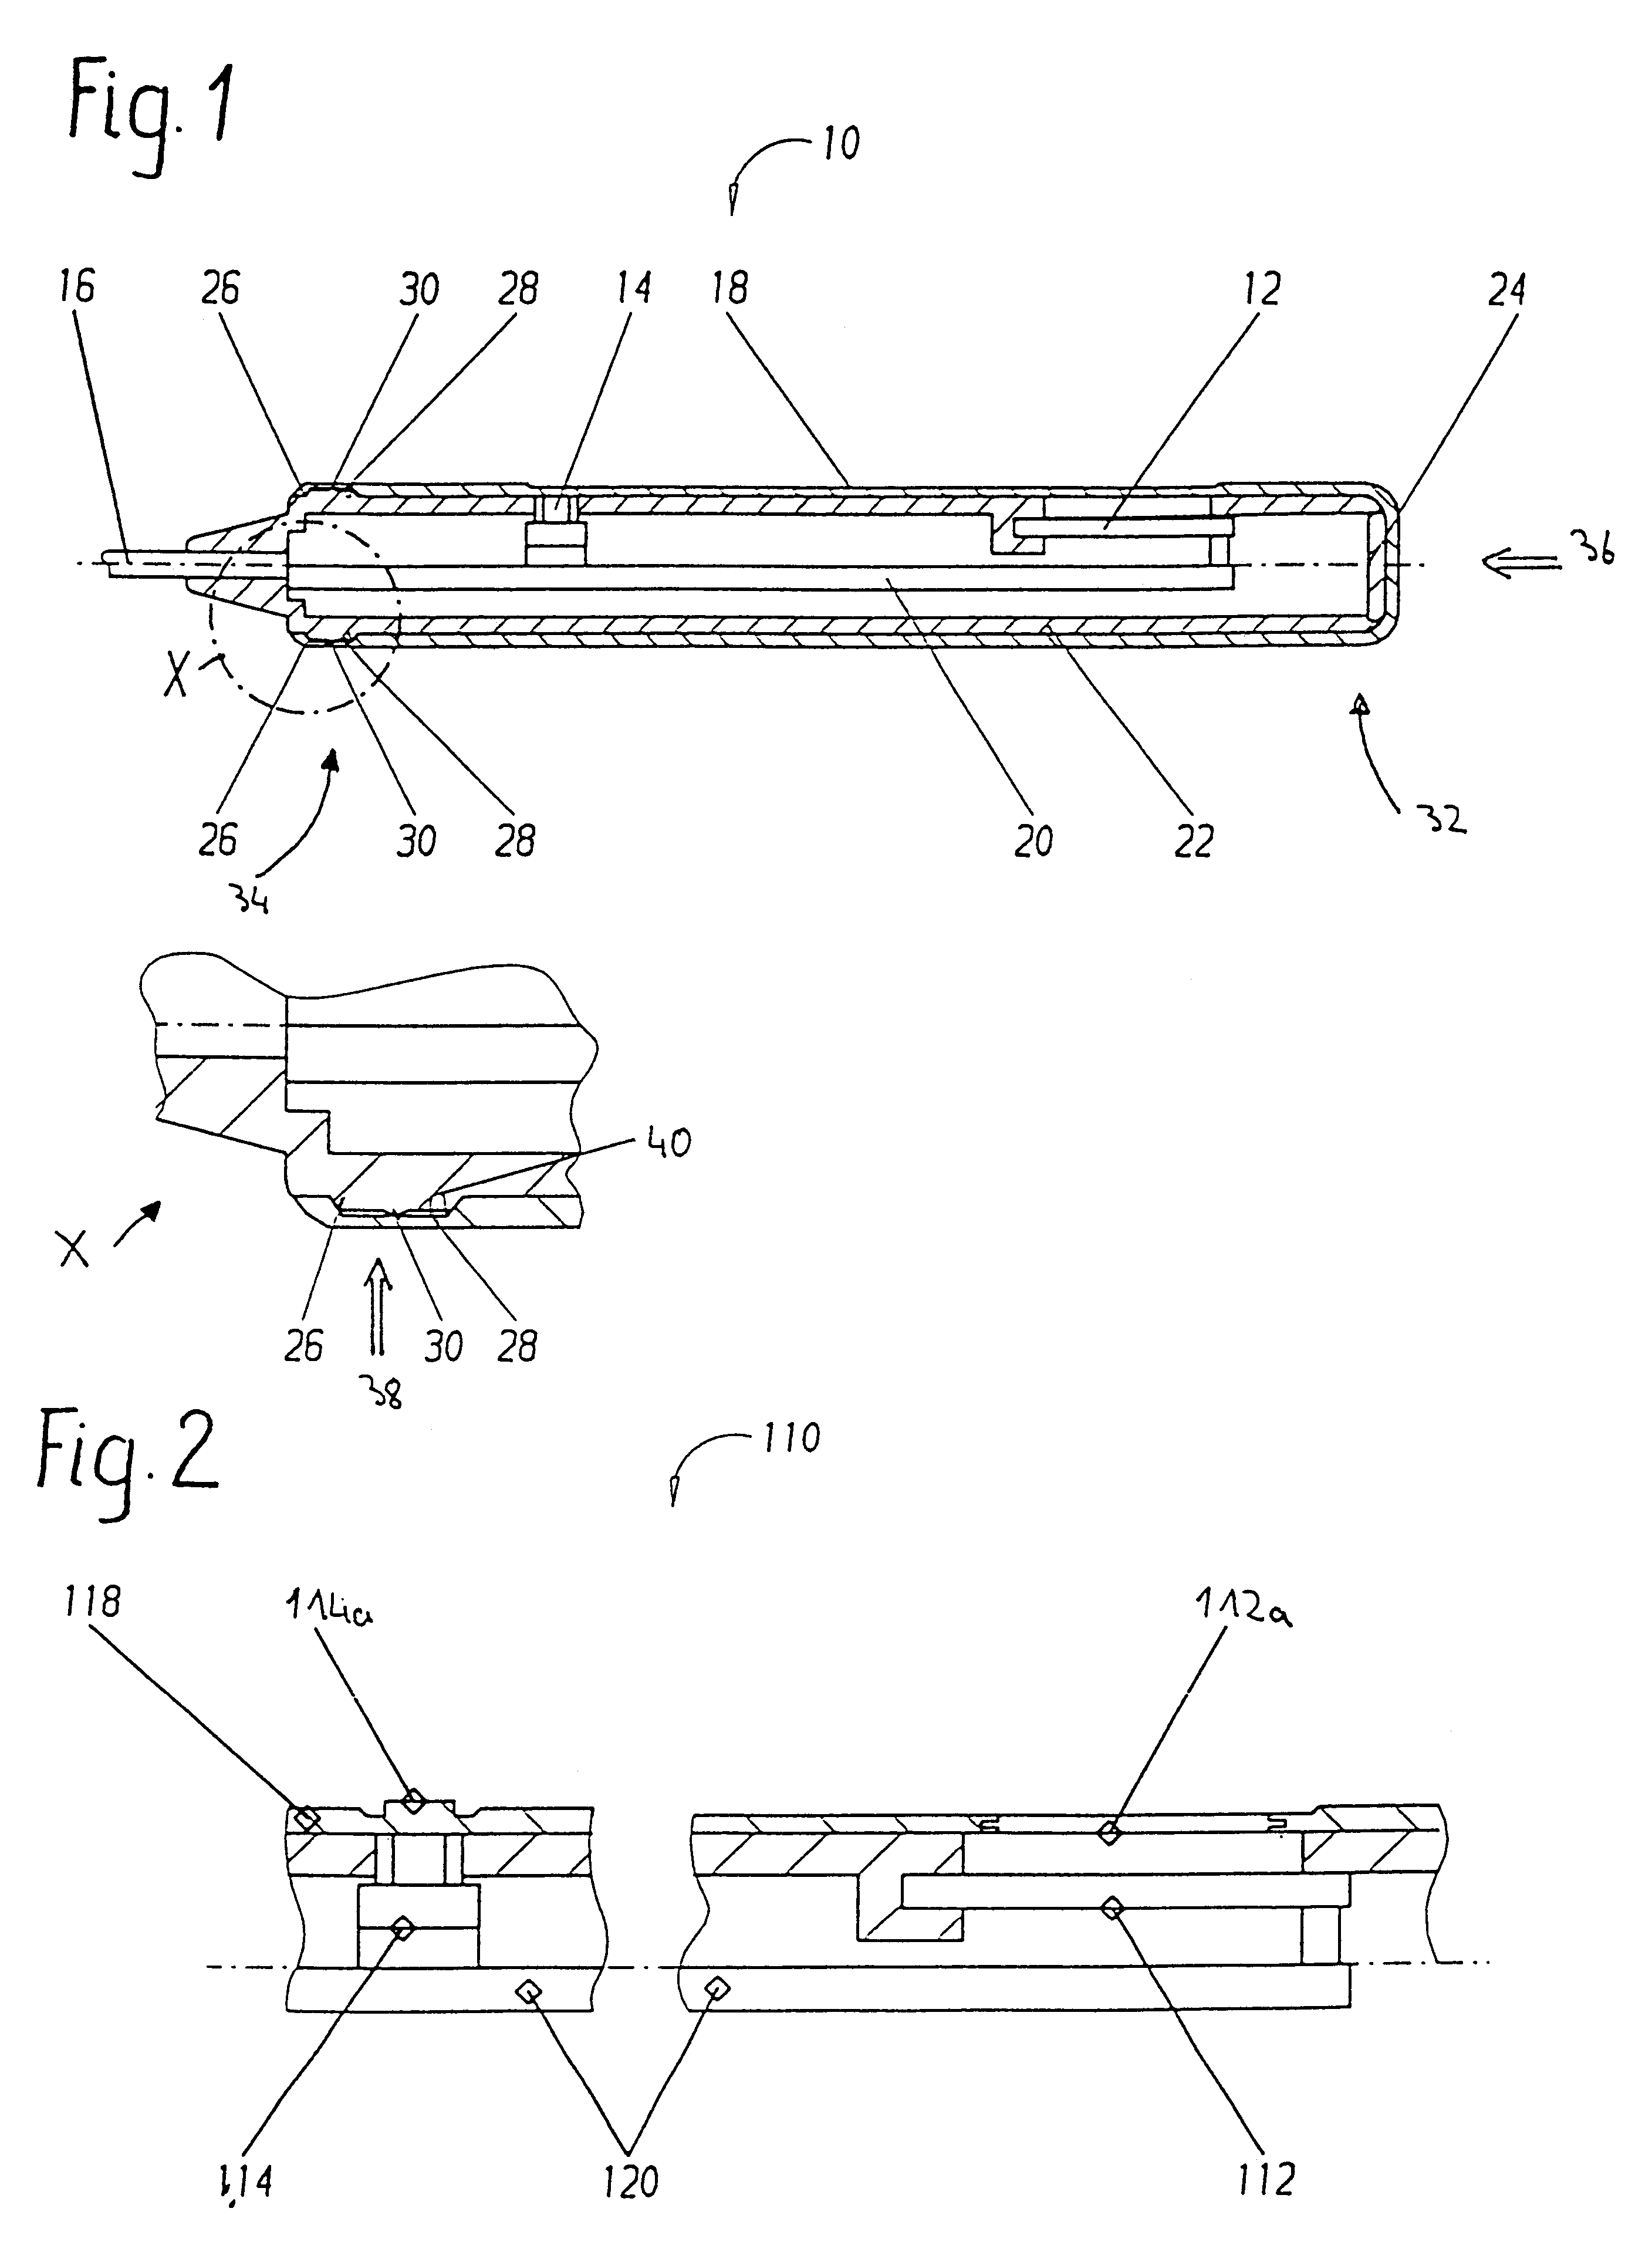 Control and display device